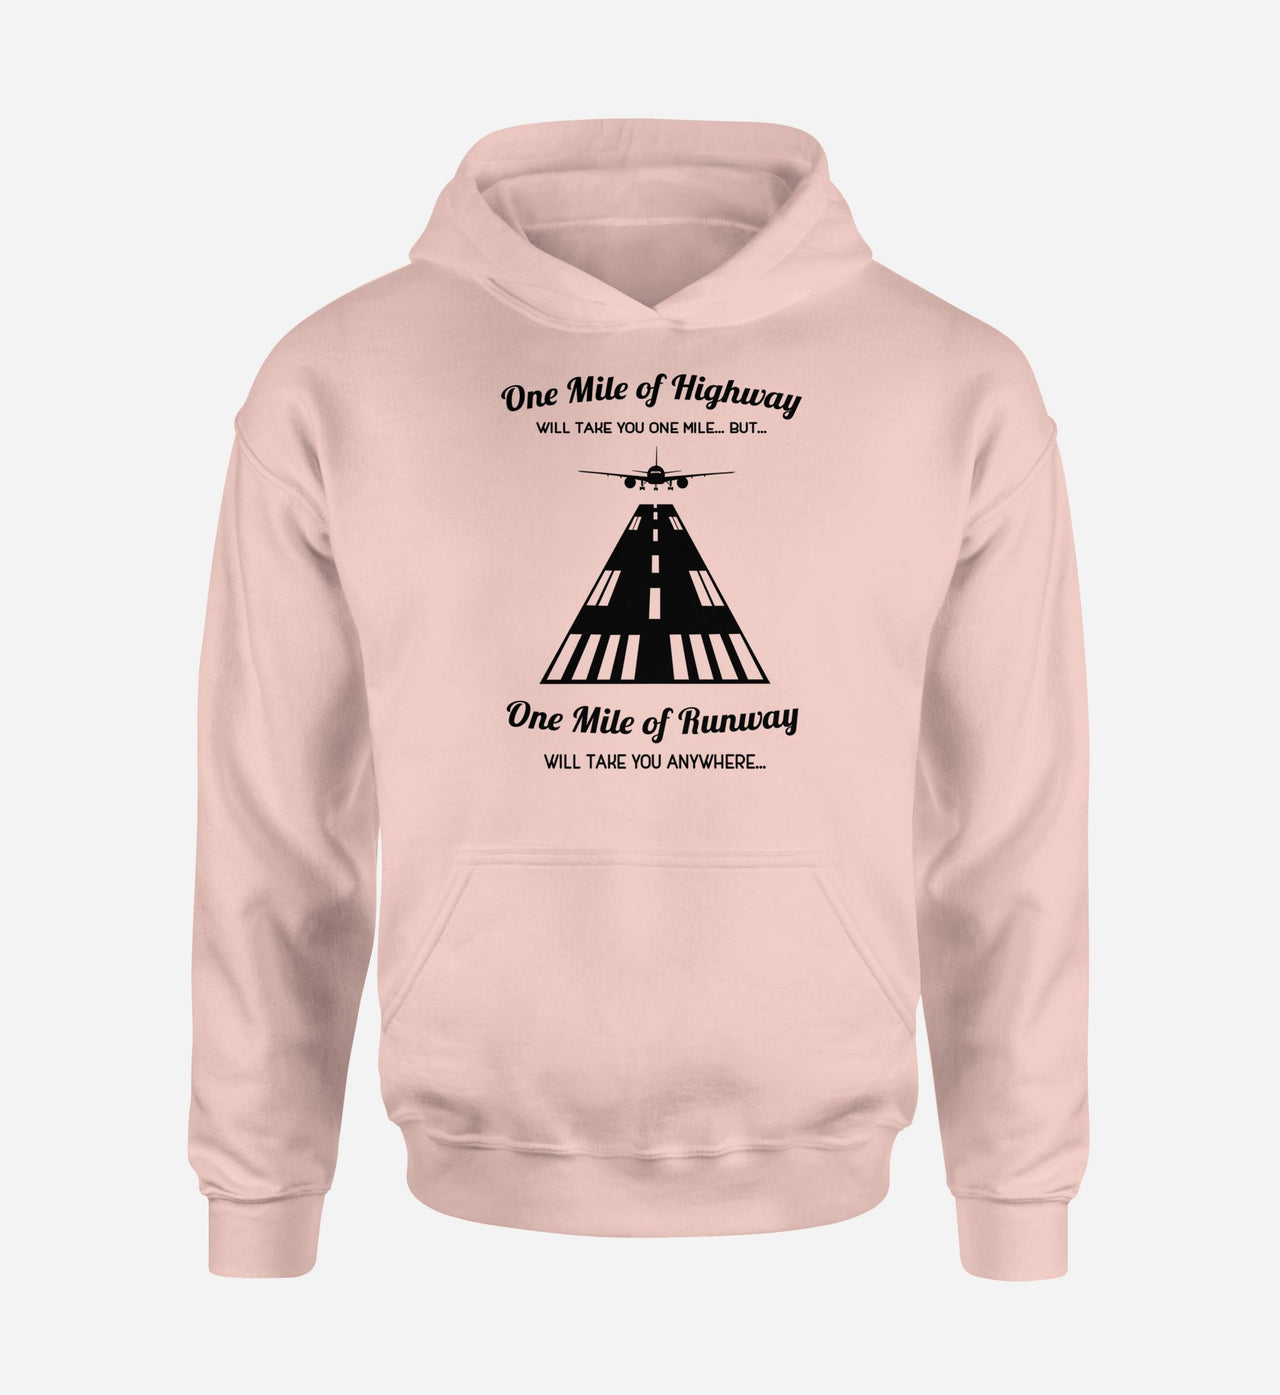 One Mile of Runway Will Take you Anywhere Designed Hoodies